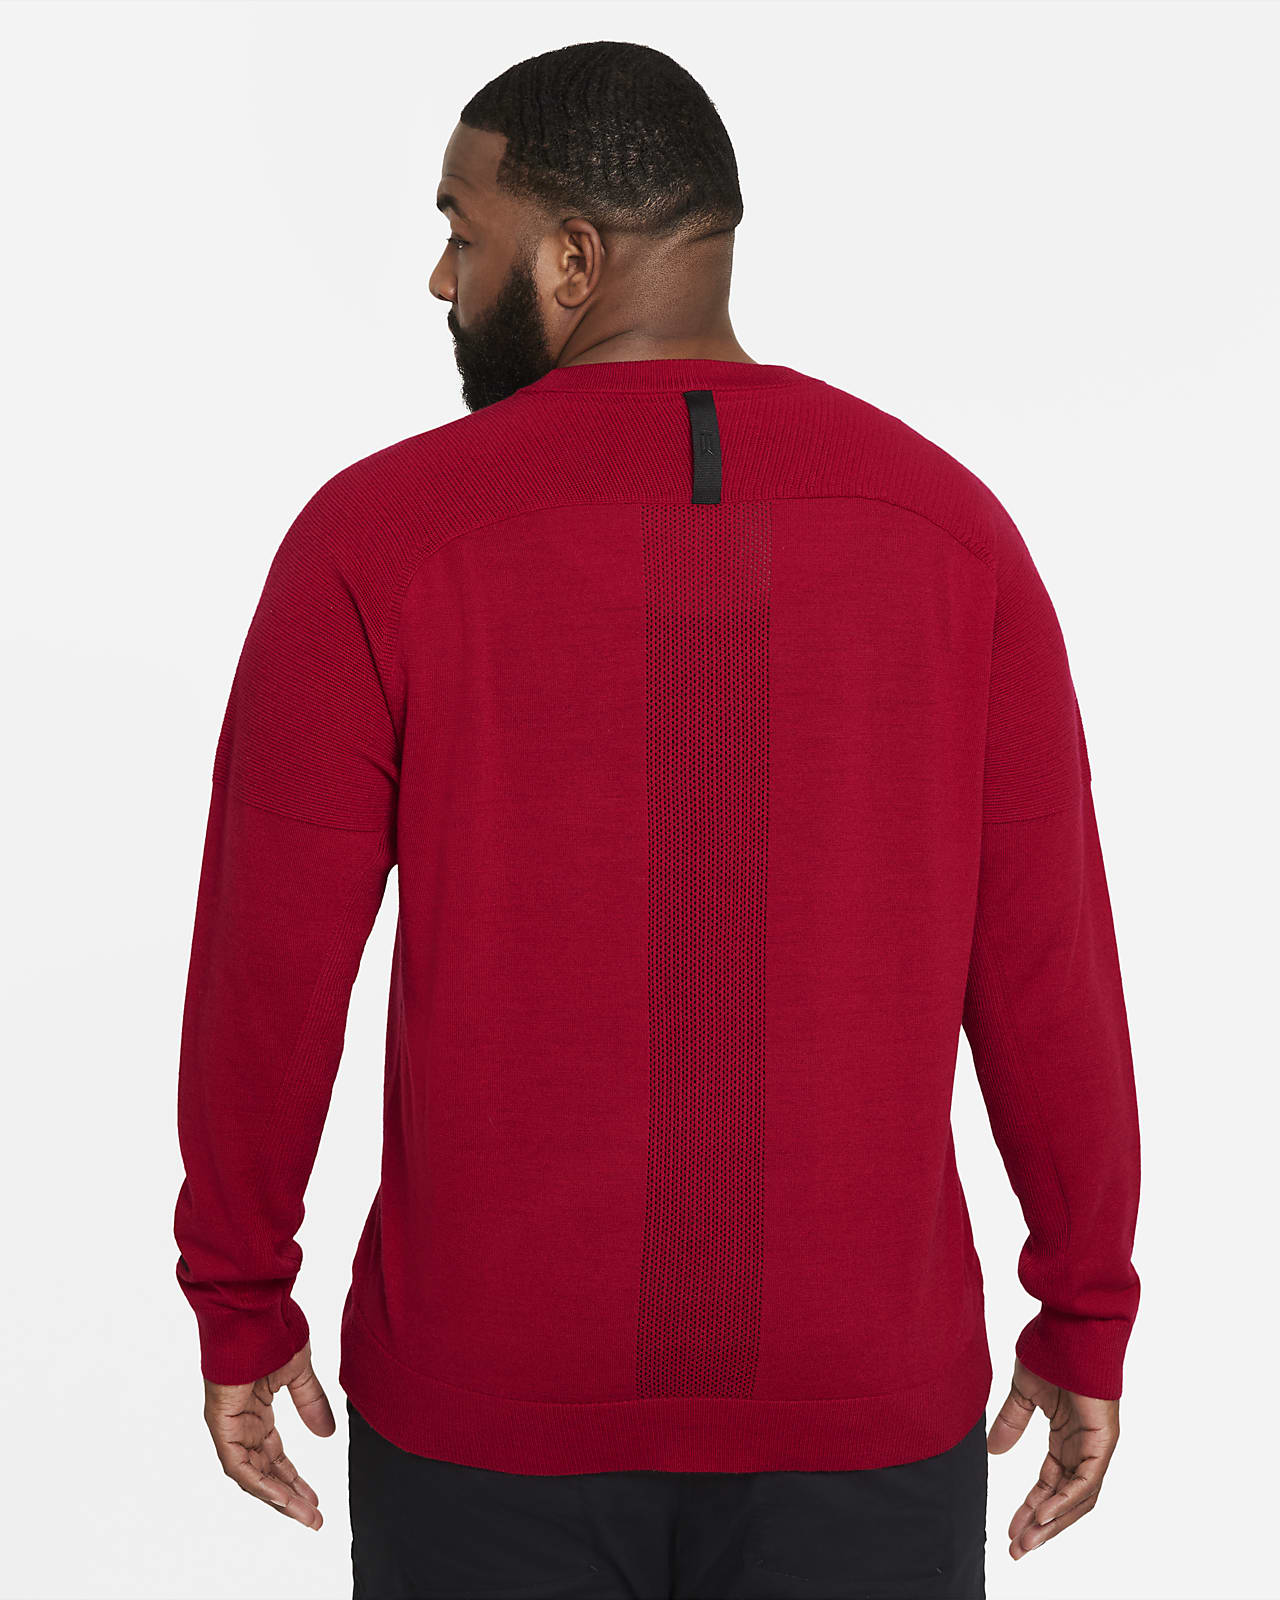 tiger woods nike pullover